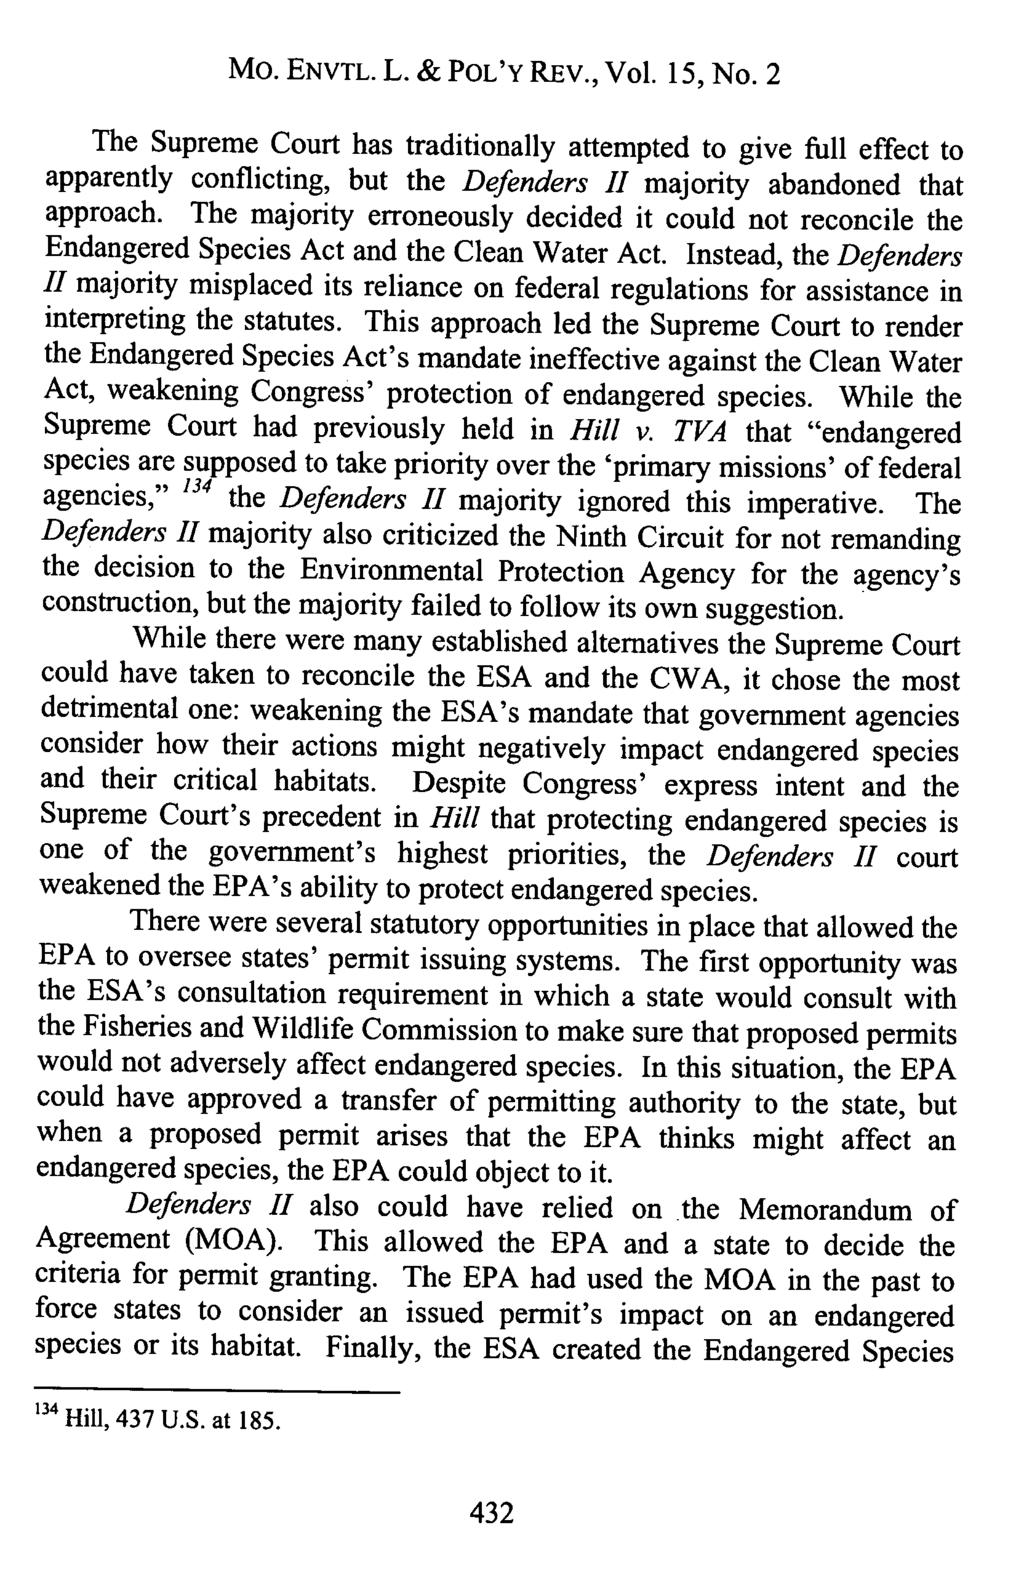 Mo. ENVTL. L. & POL'Y REv., Vol. 15, No. 2 The Supreme Court has traditionally attempted to give full effect to apparently conflicting, but the Defenders H majority abandoned that approach.